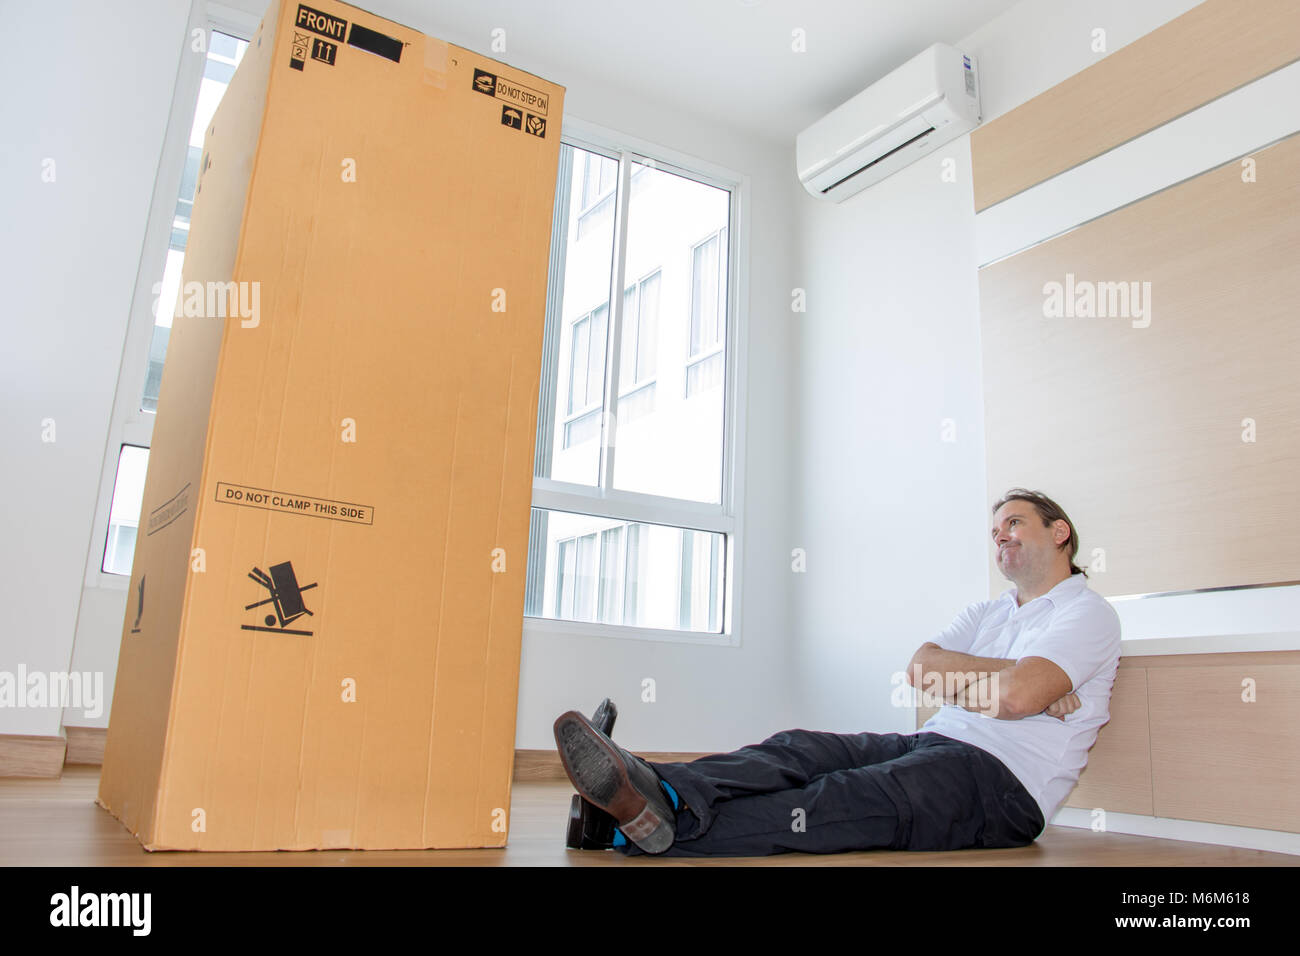 https://c8.alamy.com/comp/M6M618/man-sitting-on-the-floor-in-an-empty-apartment-looking-at-a-big-cardboard-M6M618.jpg